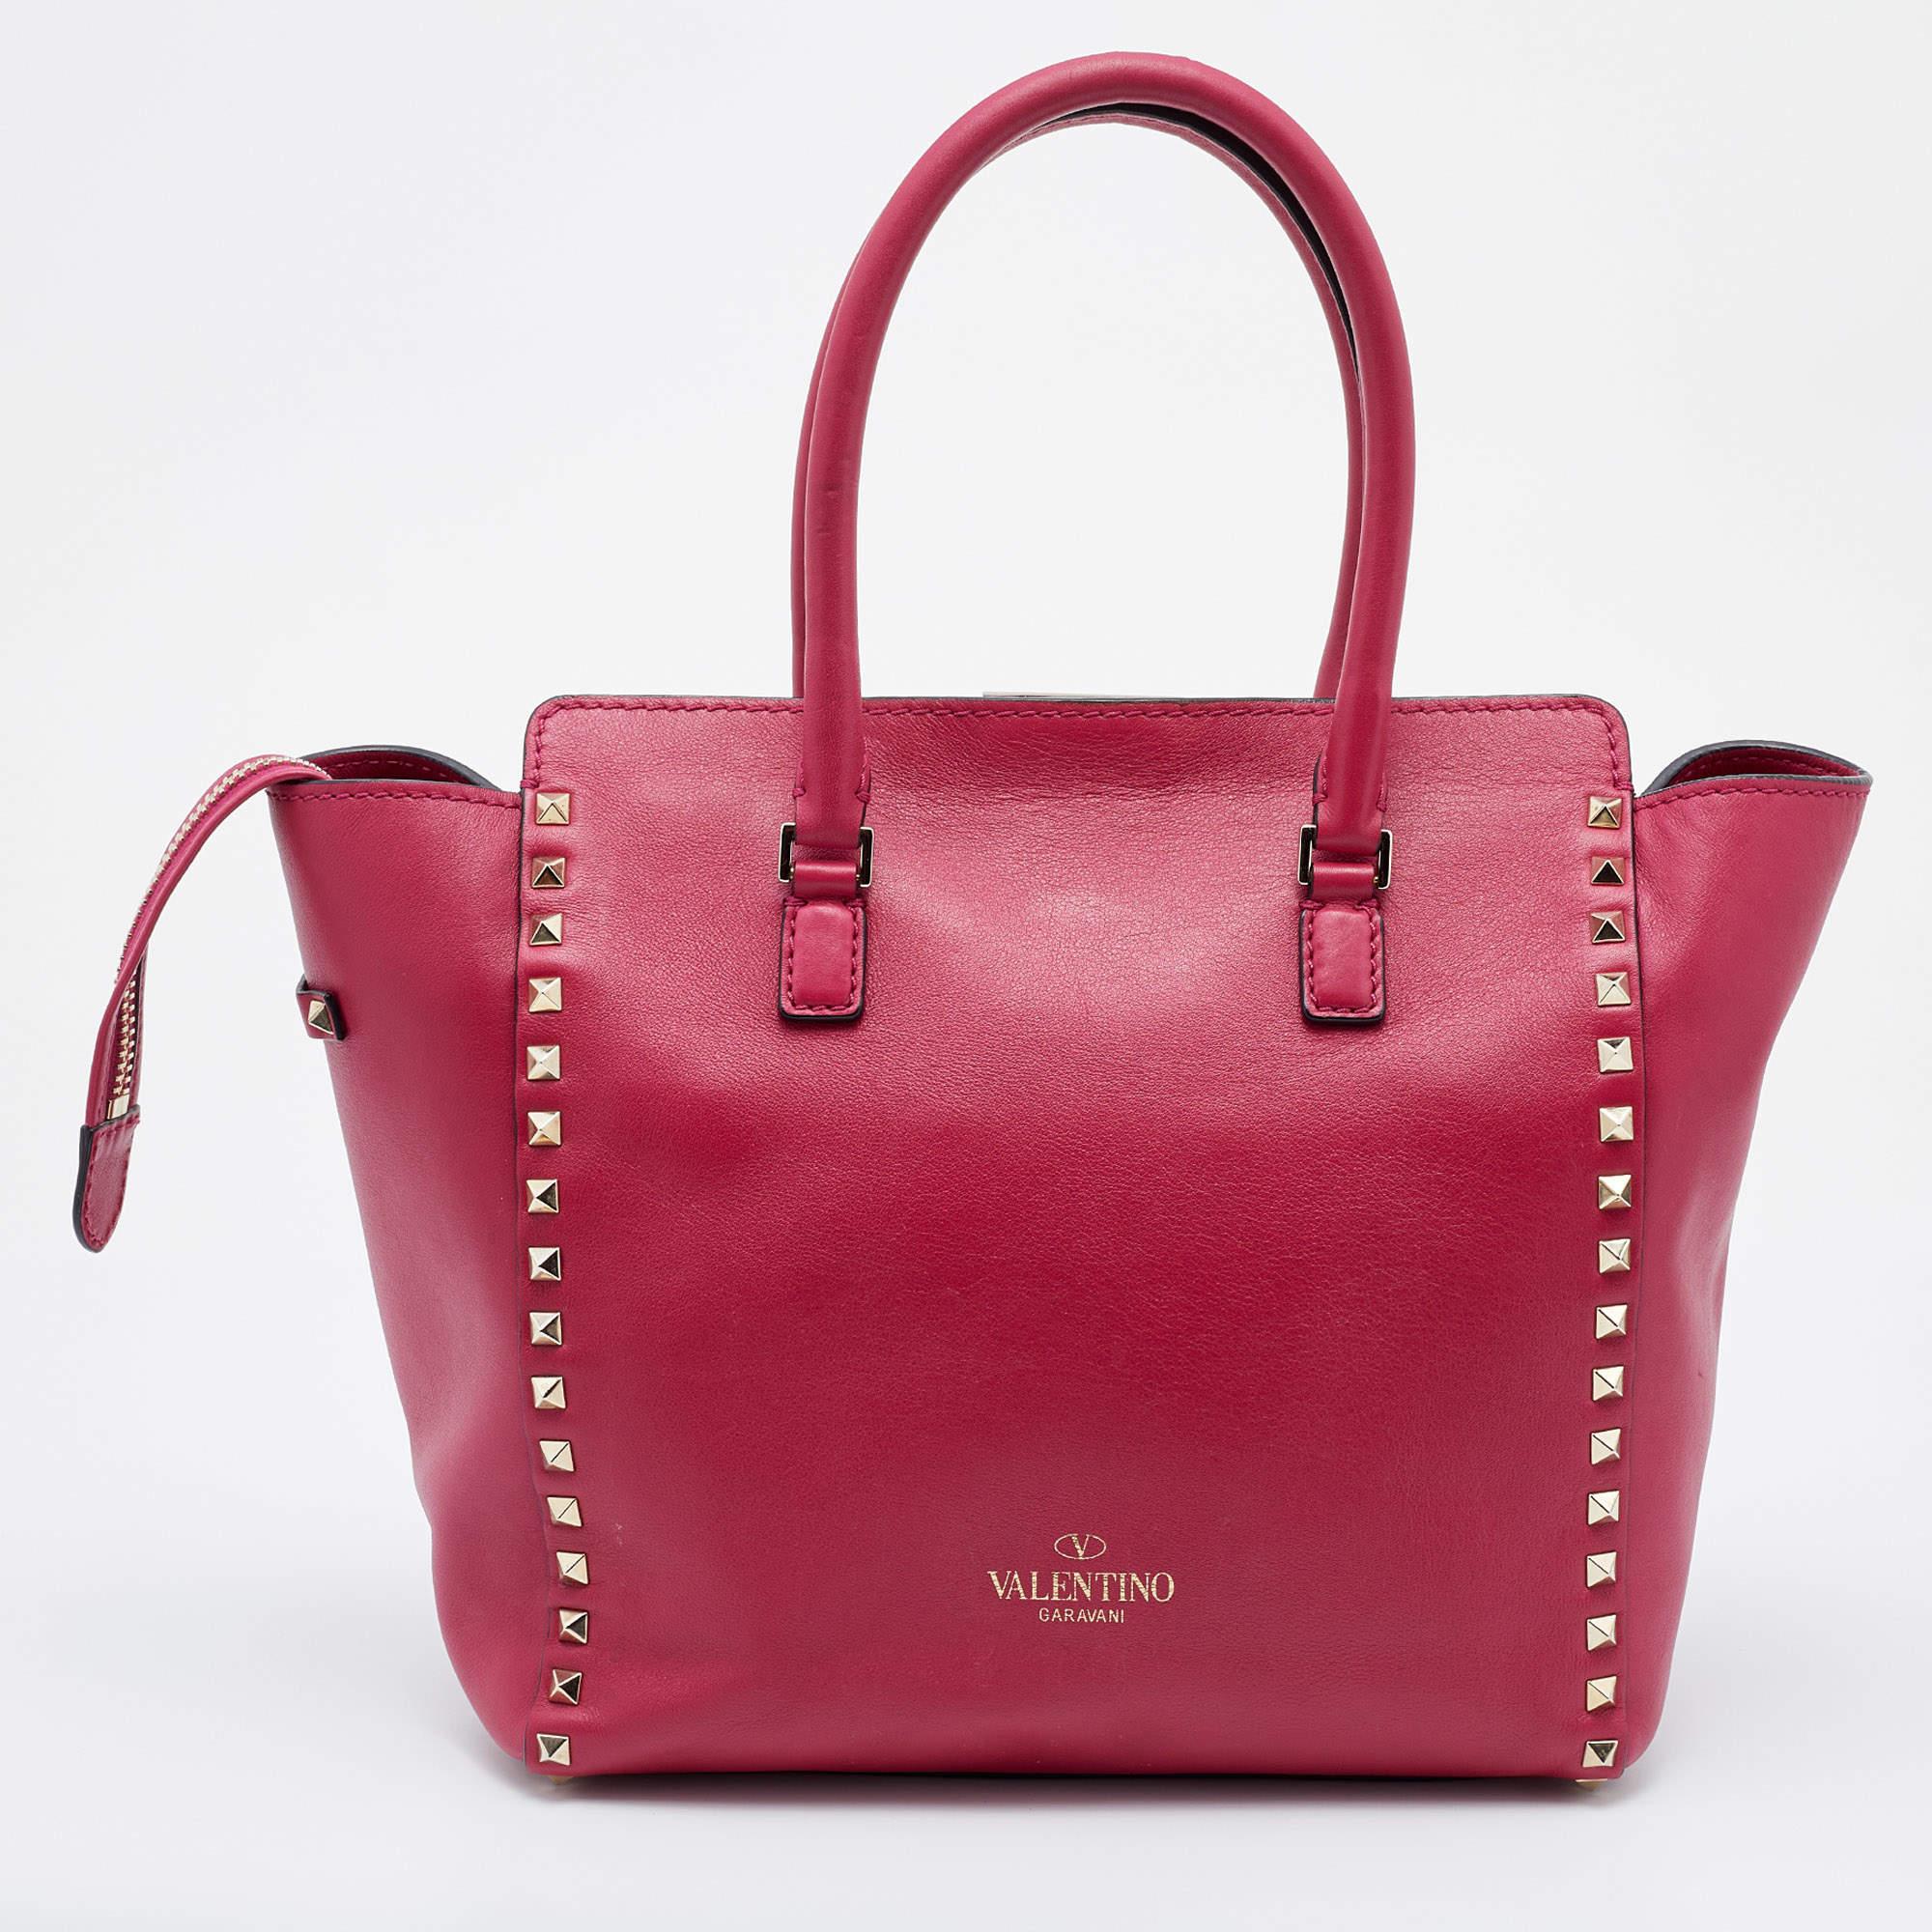 Luxury Italian fashion house Valentino is famed for its classic designs infused with its own signature modern edge, and Rockstud details beautifully outline this Trapeze tote. Crafted from leather, it features dual handles and a detachable shoulder